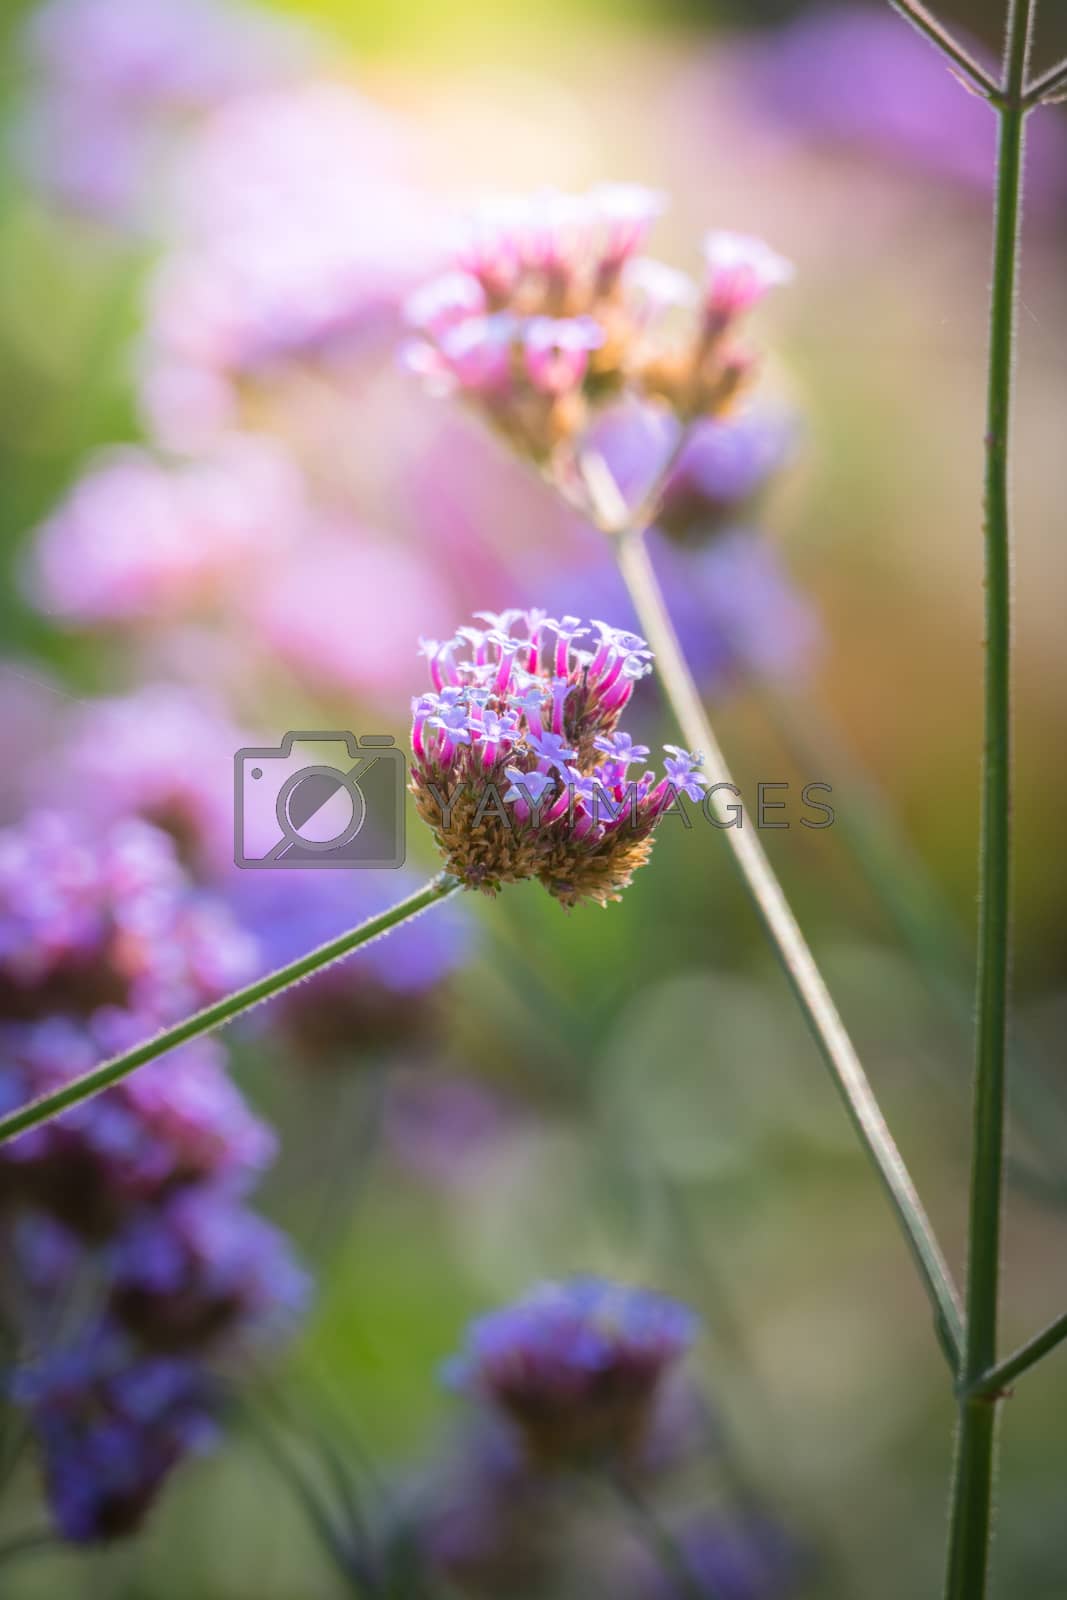 Royalty free image of The background image of the colorful flowers by teerawit